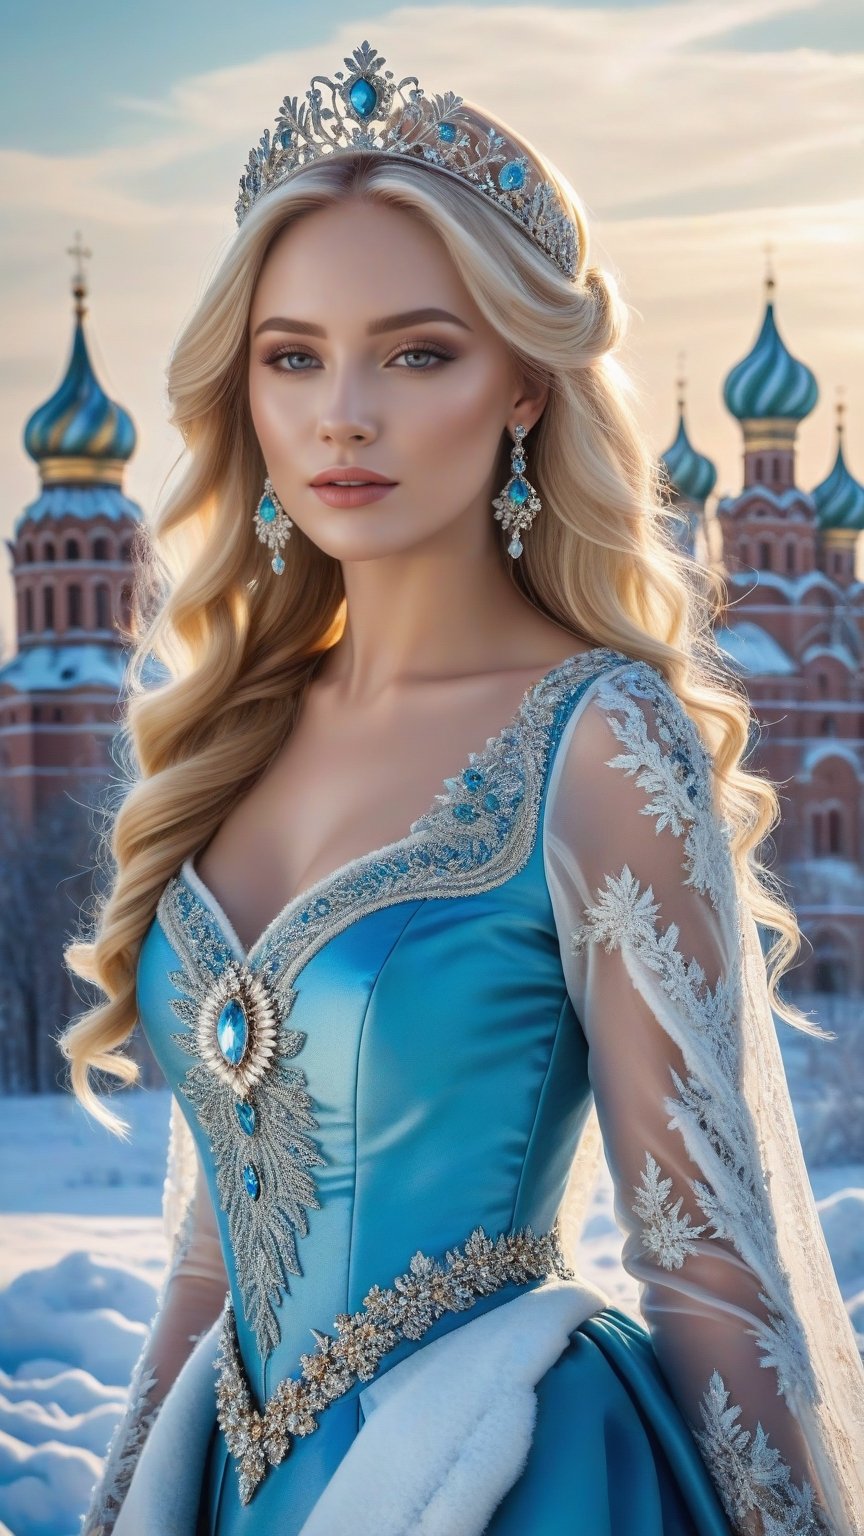 best quality, masterpiece,	
Amidst the winter wonderland of Russia, a beautiful girl with very long wavy blonde hair stands out against the snow-covered landscape, embodying the elegance of Rococo style. Her attire, a harmonious blend of the latest fashion trends and traditional Russian elements, dazzles with ornate jewelry that sparkles like the icy terrain around her. This enchanting scene, set against the backdrop of a quintessential Russian setting, showcases her as a modern-day princess, bridging the gap between the opulence of the past and the chic style of the present.
ultra realistic illustration, siena natural ratio, ultra hd, realistic, vivid colors, highly detailed, UHD drawing, perfect composition, ultra hd, 8k, he has an inner glow, stunning, something that even doesn't exist, mythical being, energy, molecular, textures, iridescent and luminescent scales, breathtaking beauty, pure perfection, divine presence, unforgettable, impressive, breathtaking beauty, Volumetric light, auras, rays, vivid colors reflects.